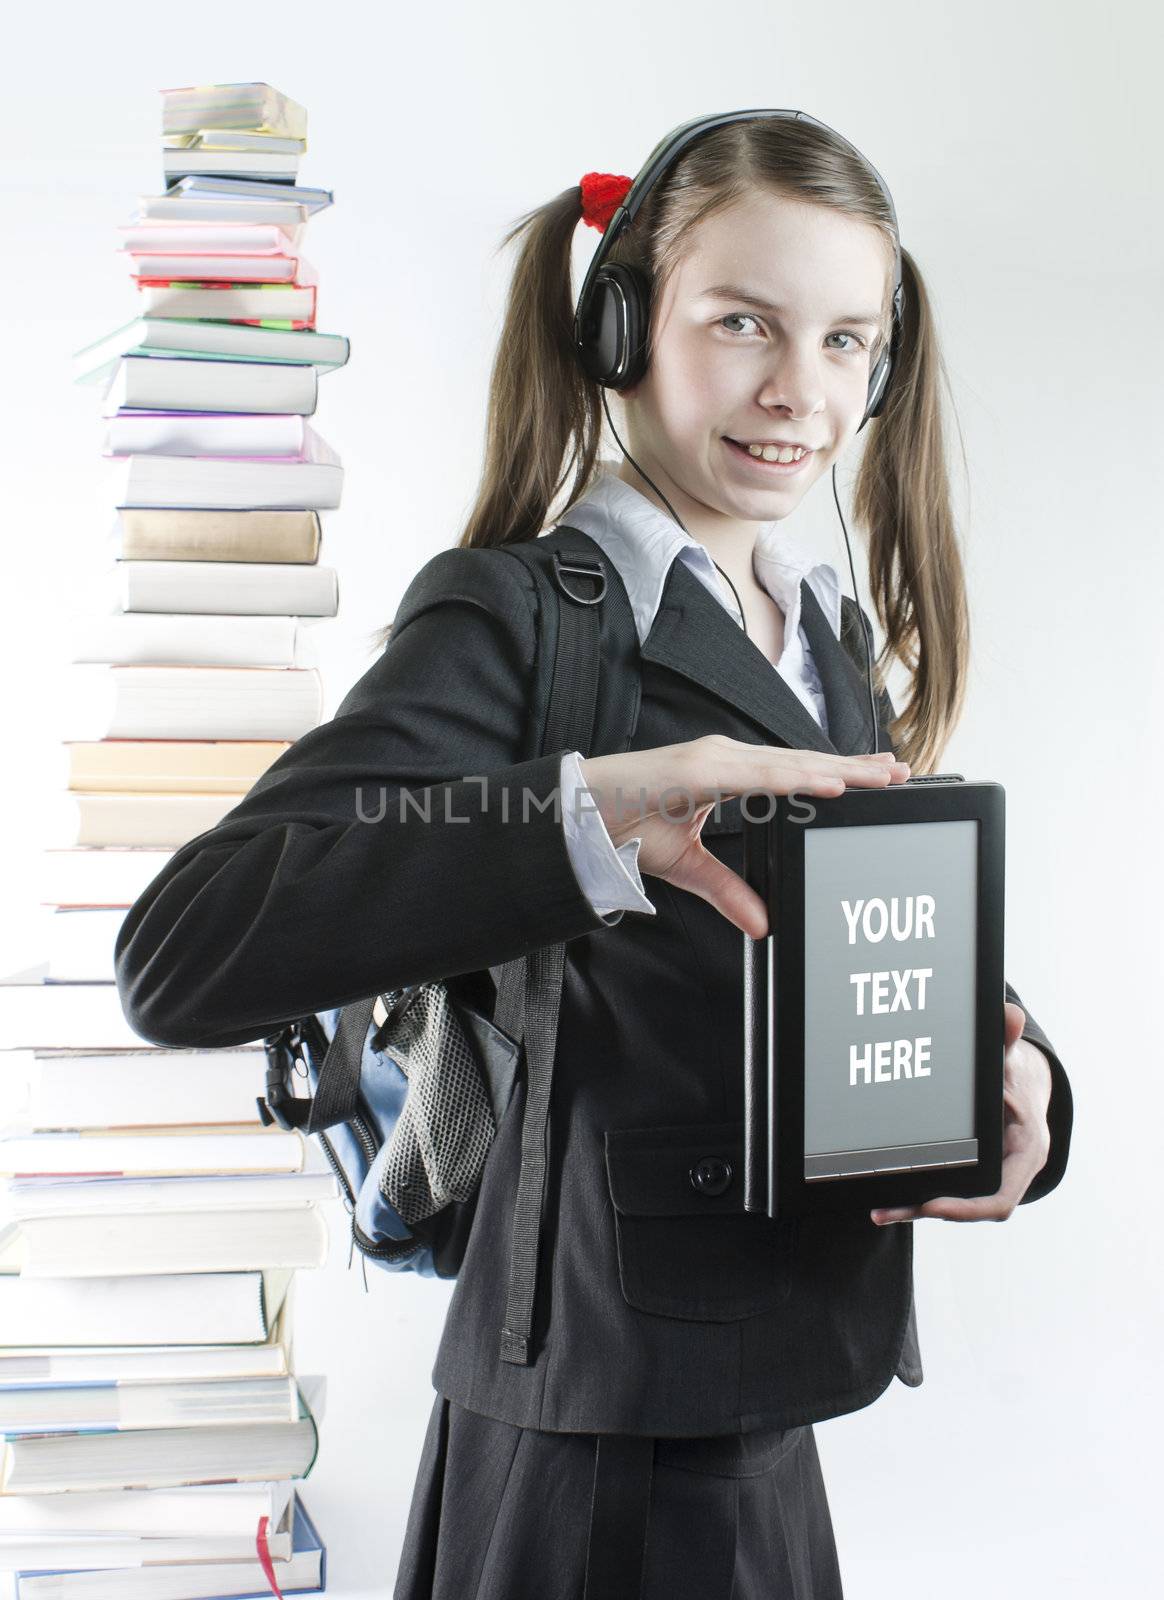 Teen girl with electronic book with a stack of printed books behind